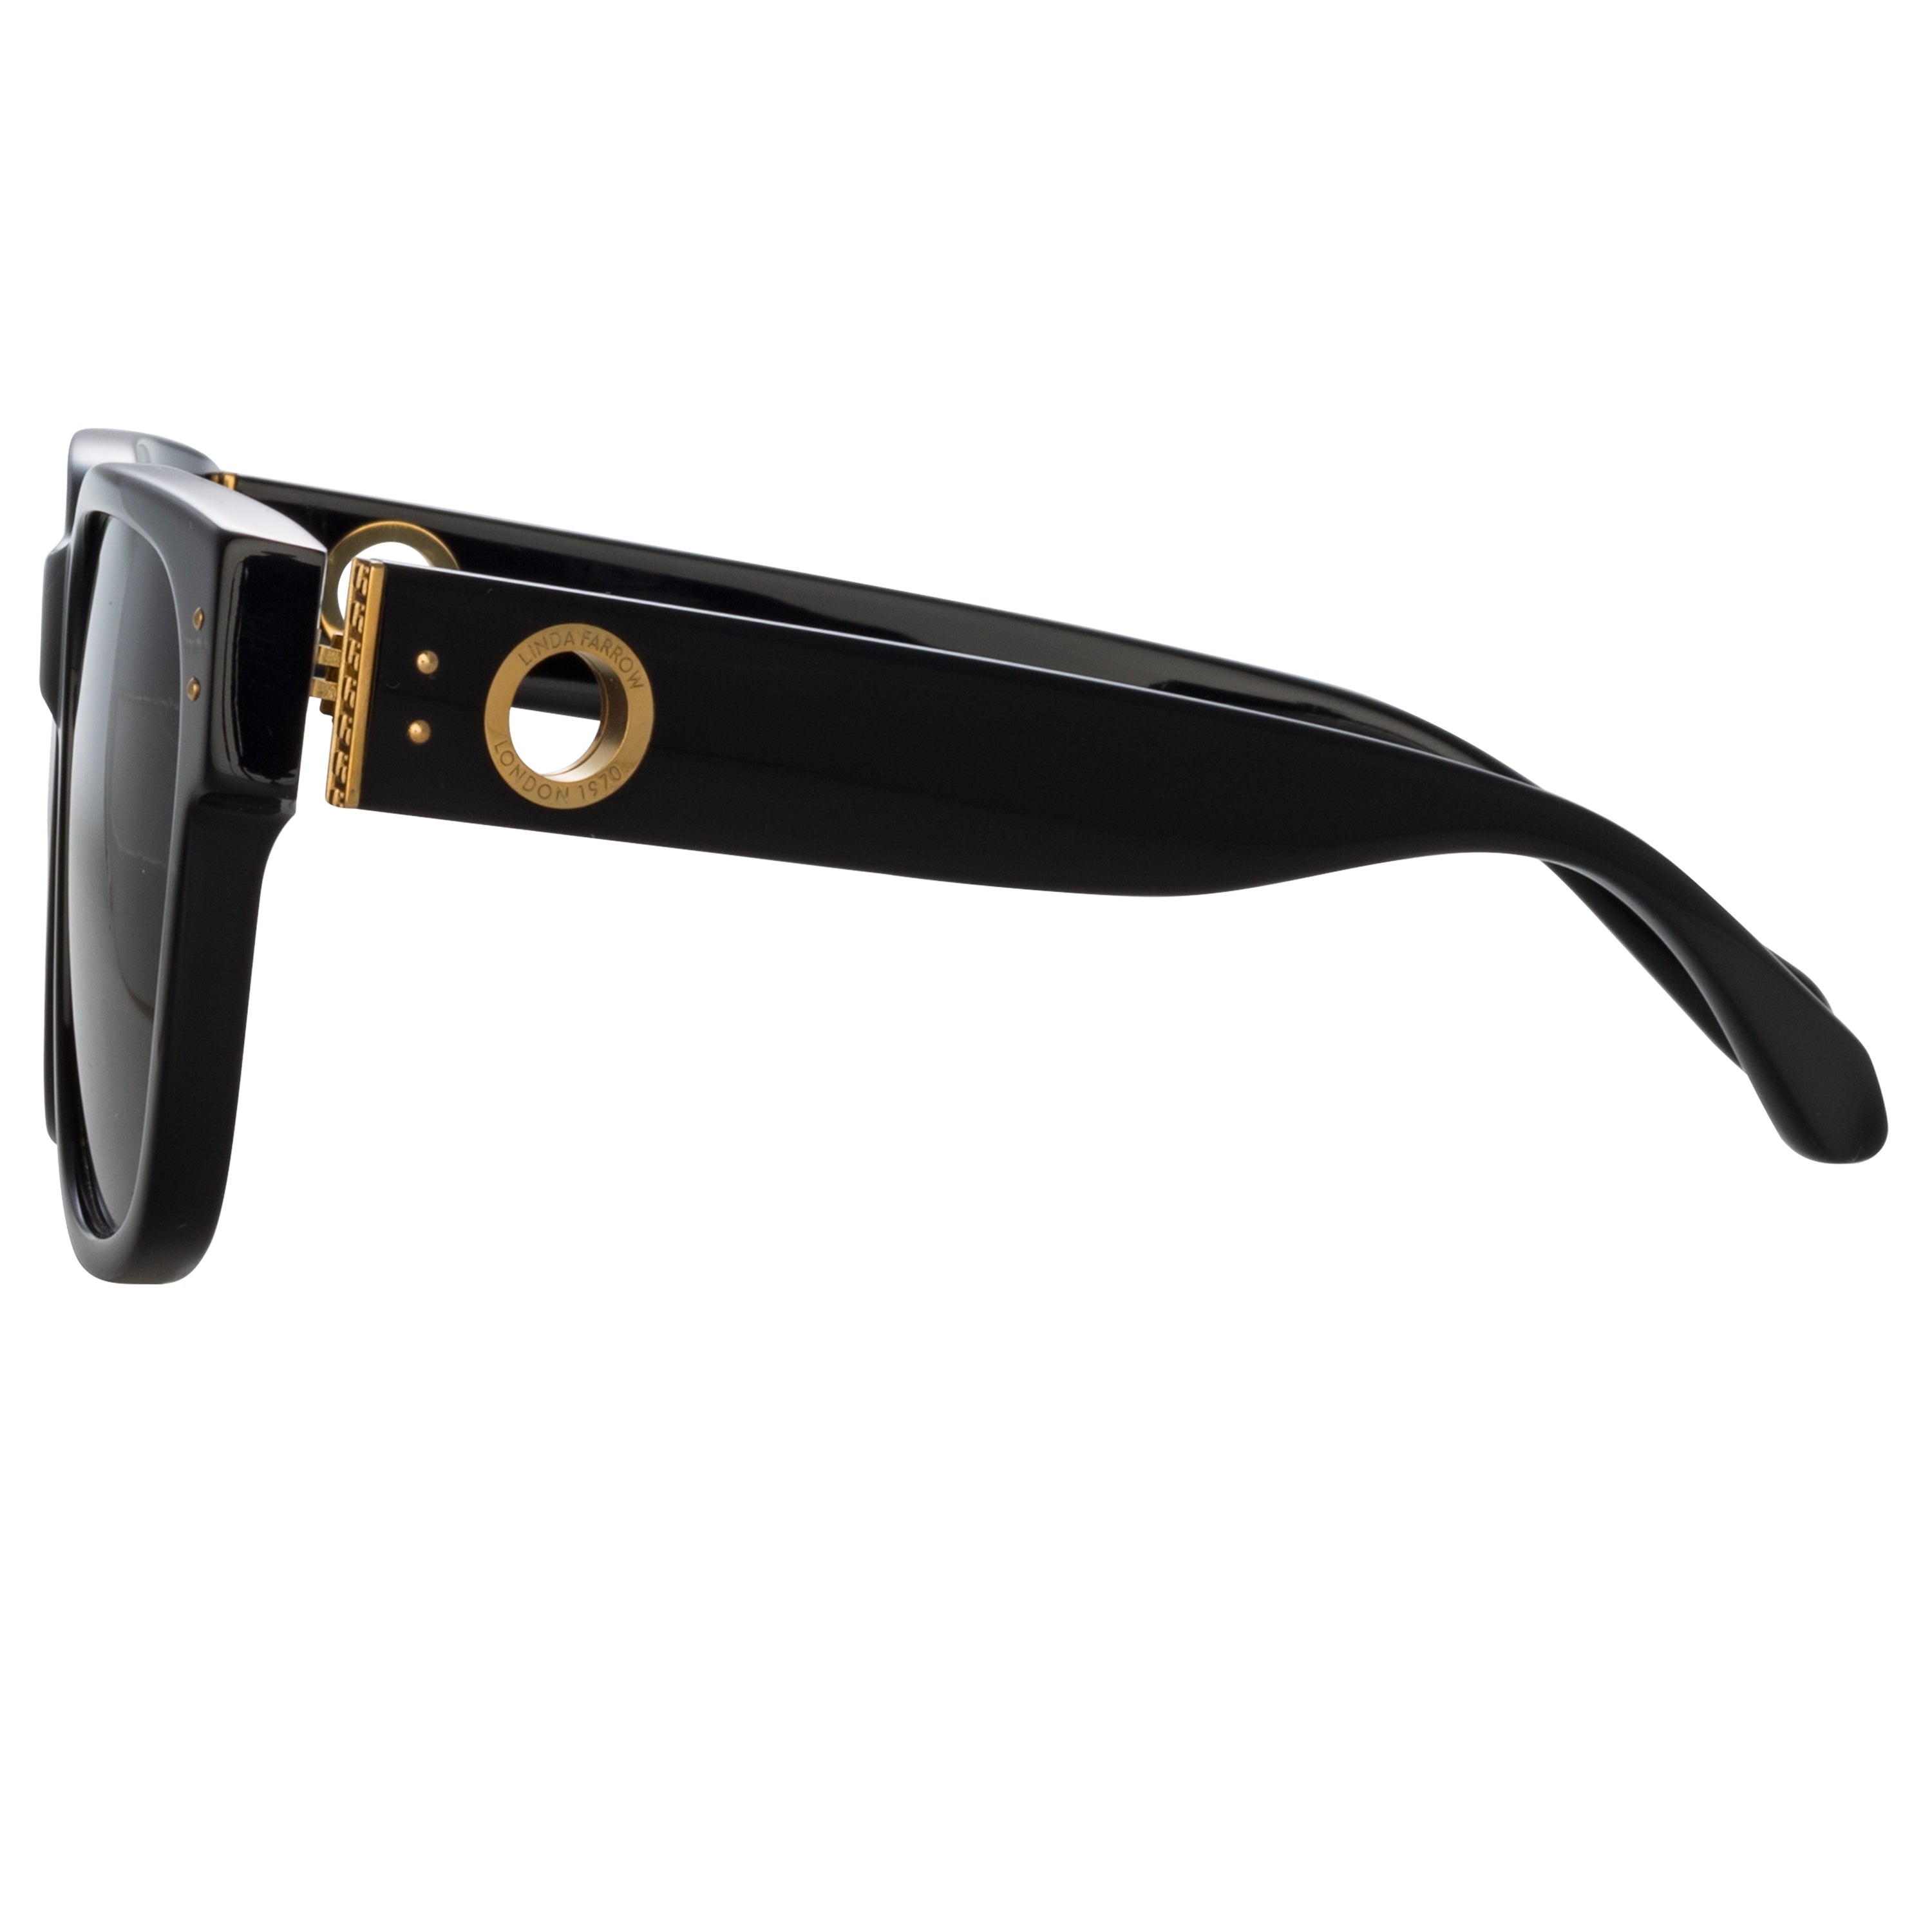 PERRY D-FRAME SUNGLASSES IN BLACK - 5